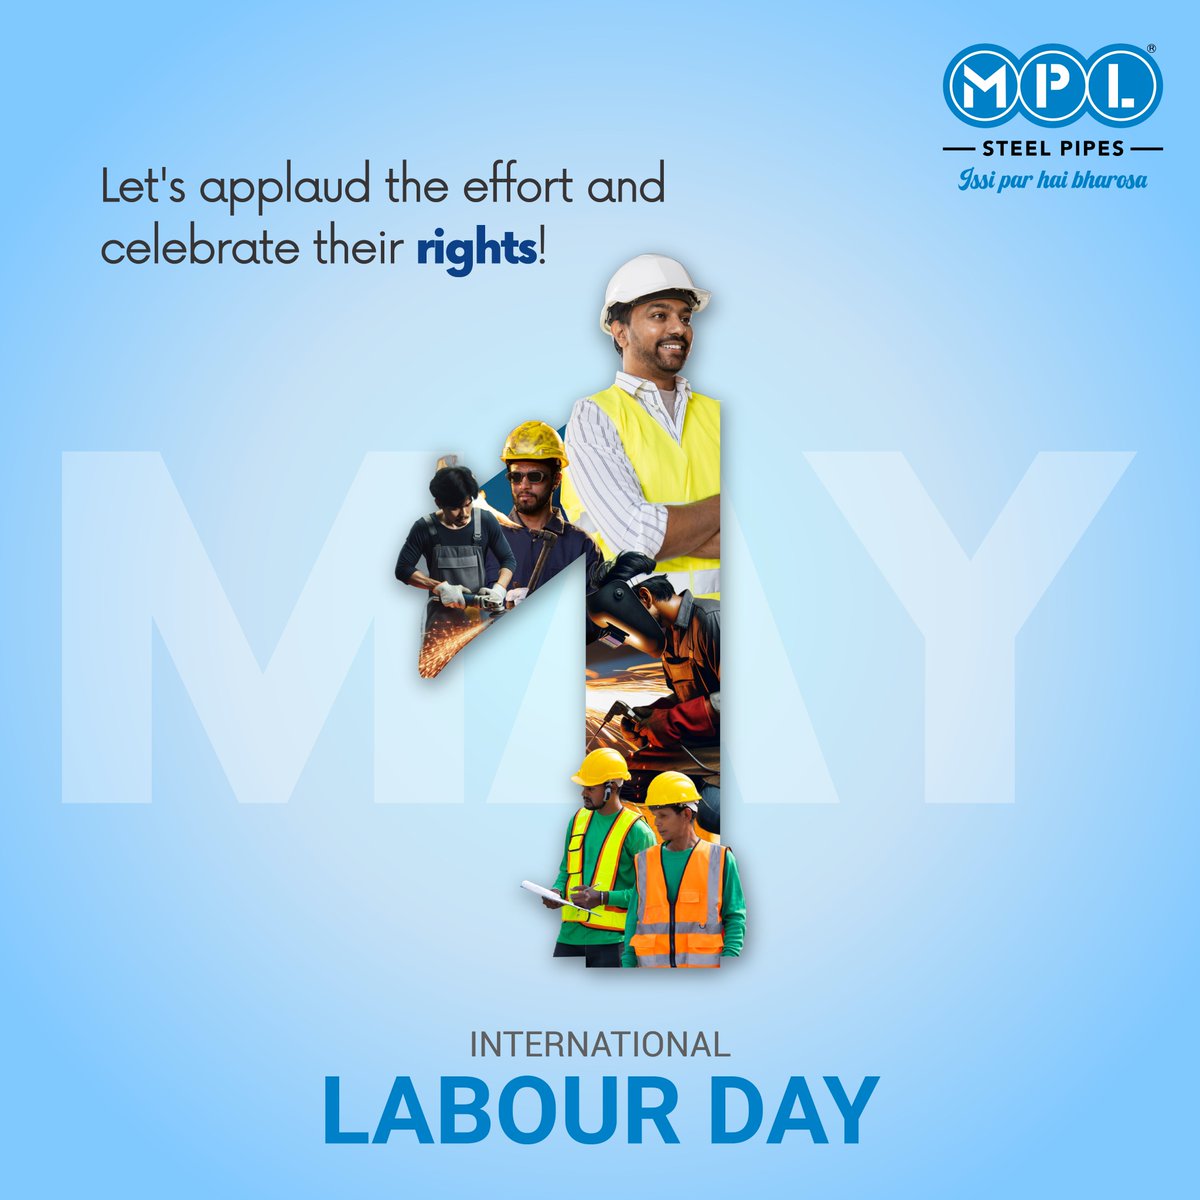 On May Day we acknowledge with pride the contribution of all our workers and their dedication to MPL.. We honor their rights and extend our wholehearted support in their every endeavor.

#MPLSteelPipes #IssiParHaiBharosa #builder #fabricator #LaborDay2024 #InternationalLabourDay